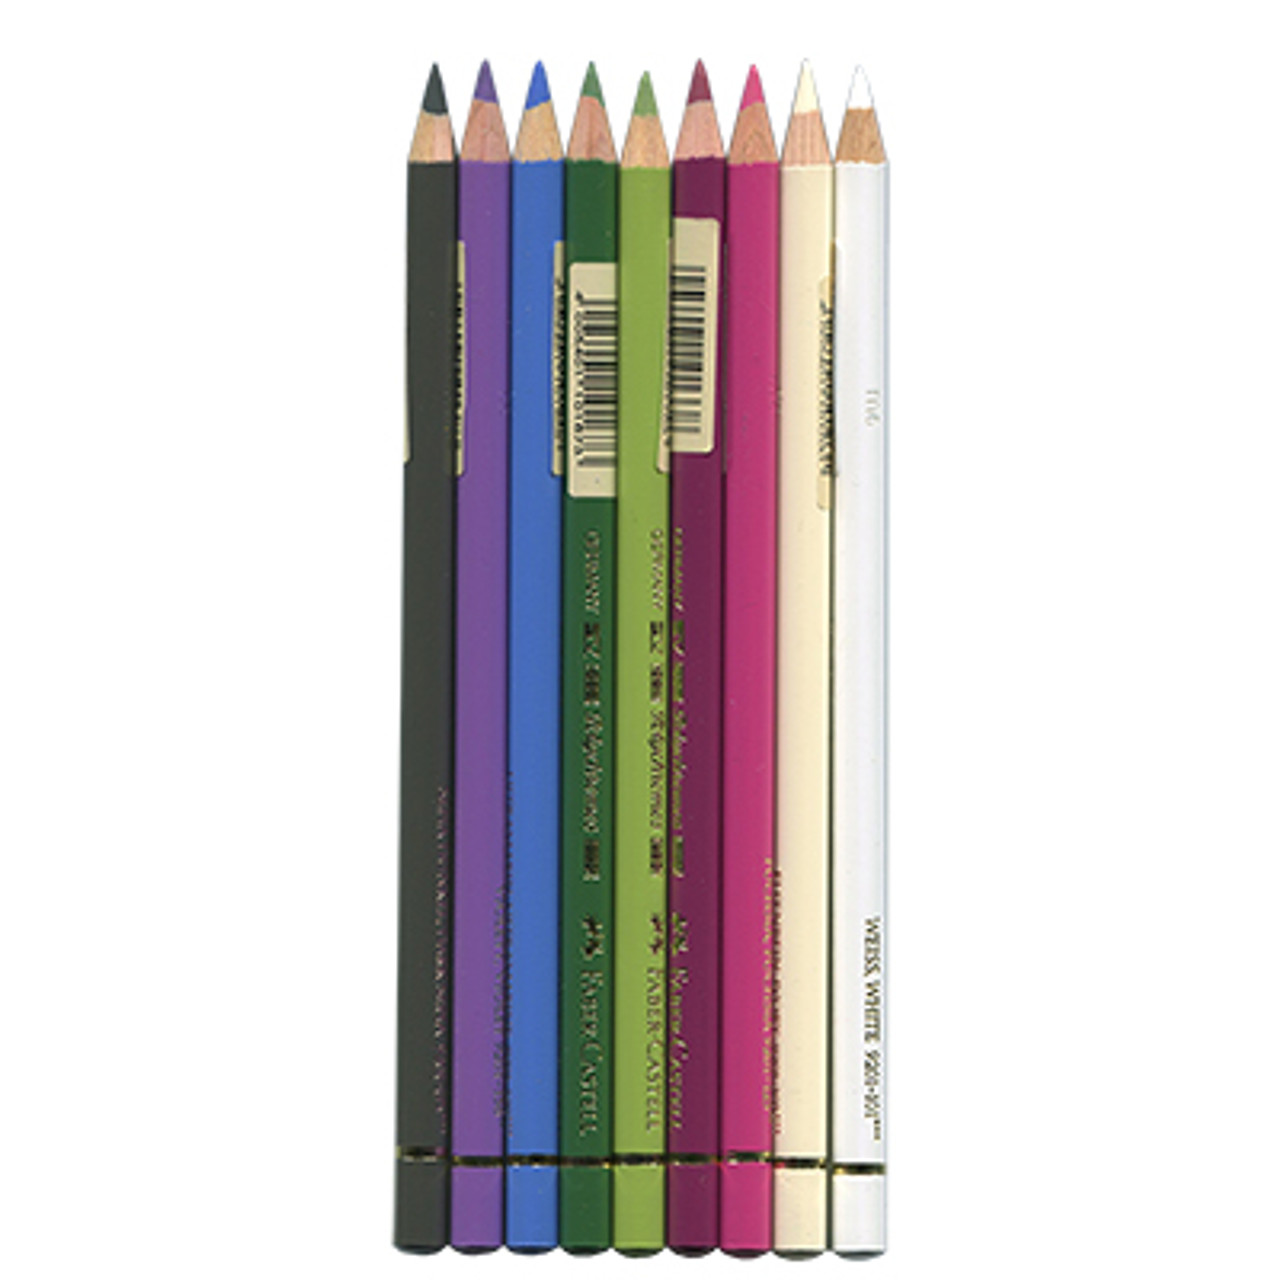 Faber-Castell Polychromos Oil-Based Colored Pencil Set of 24